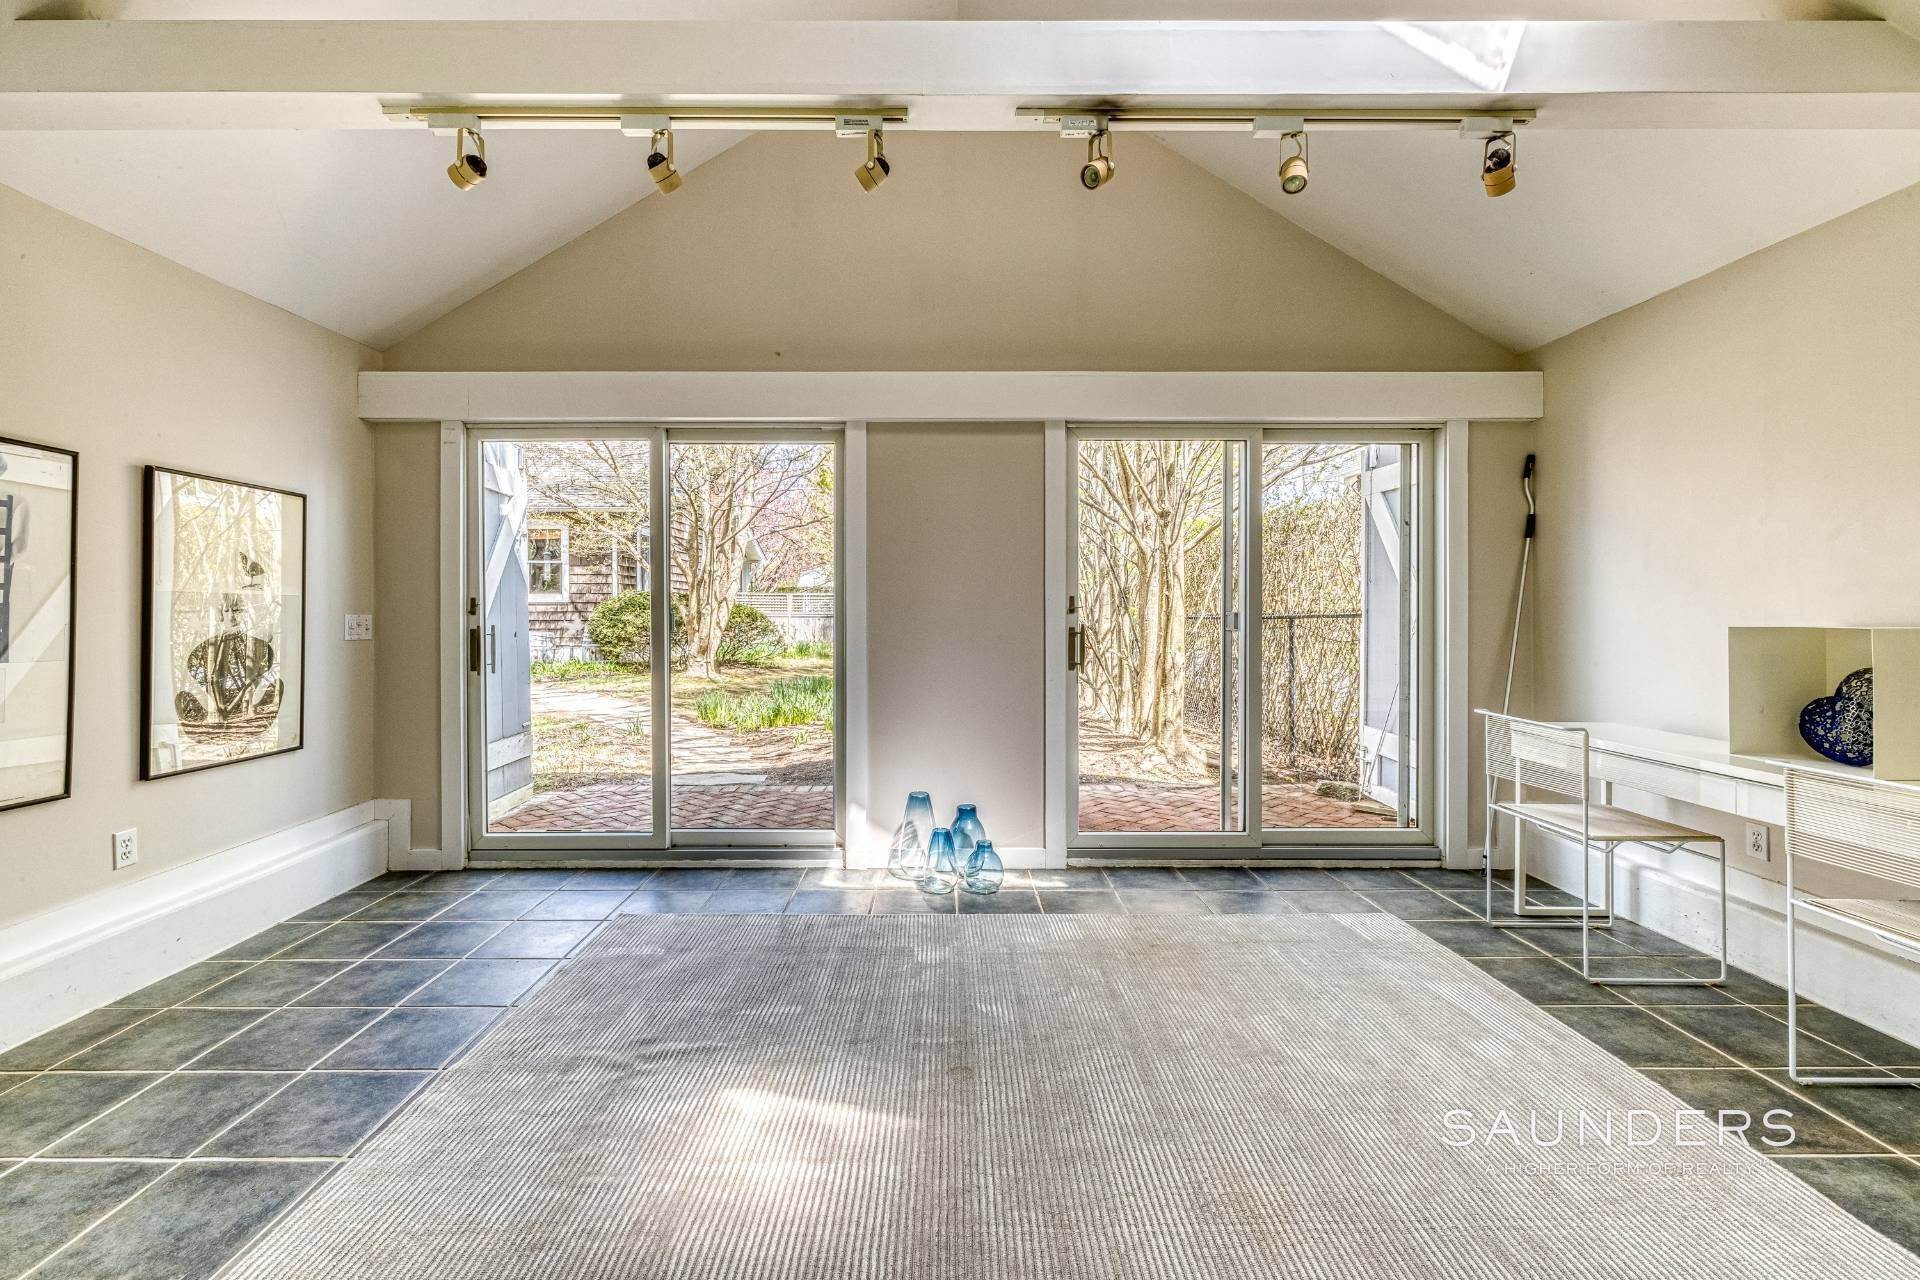 42. Single Family Homes for Sale at Shelter Island Renovated 1931 Bungalow With Pool 23 Smith Street, Shelter Island, NY 11964